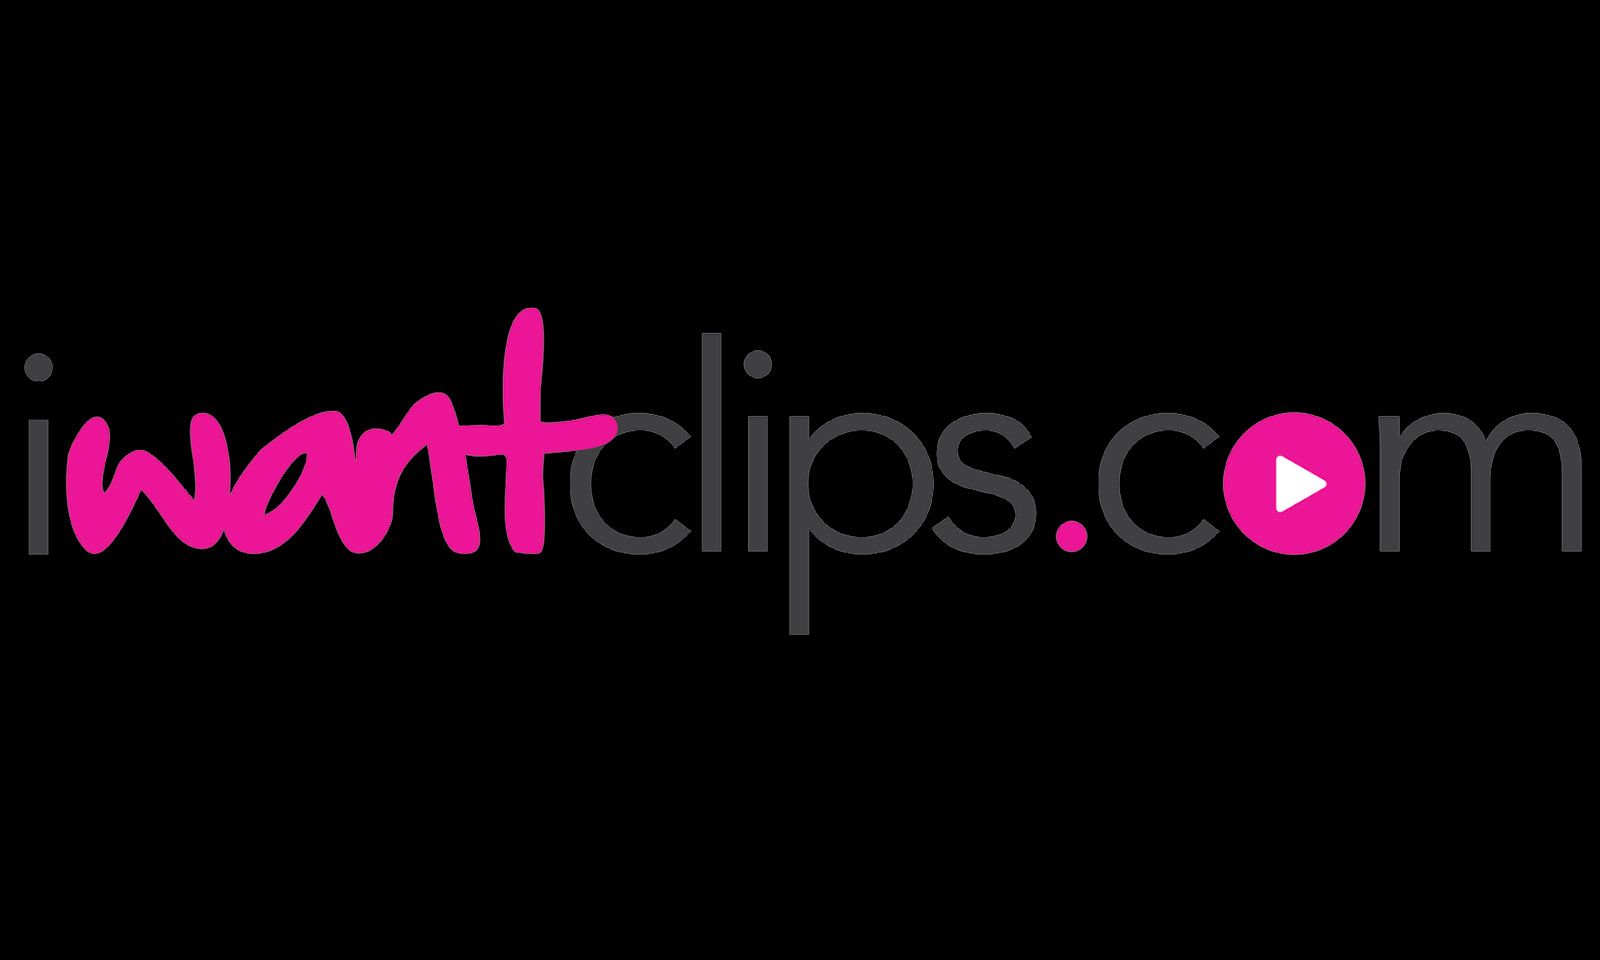 Research Finds IWantclips.com Growing In Popularity